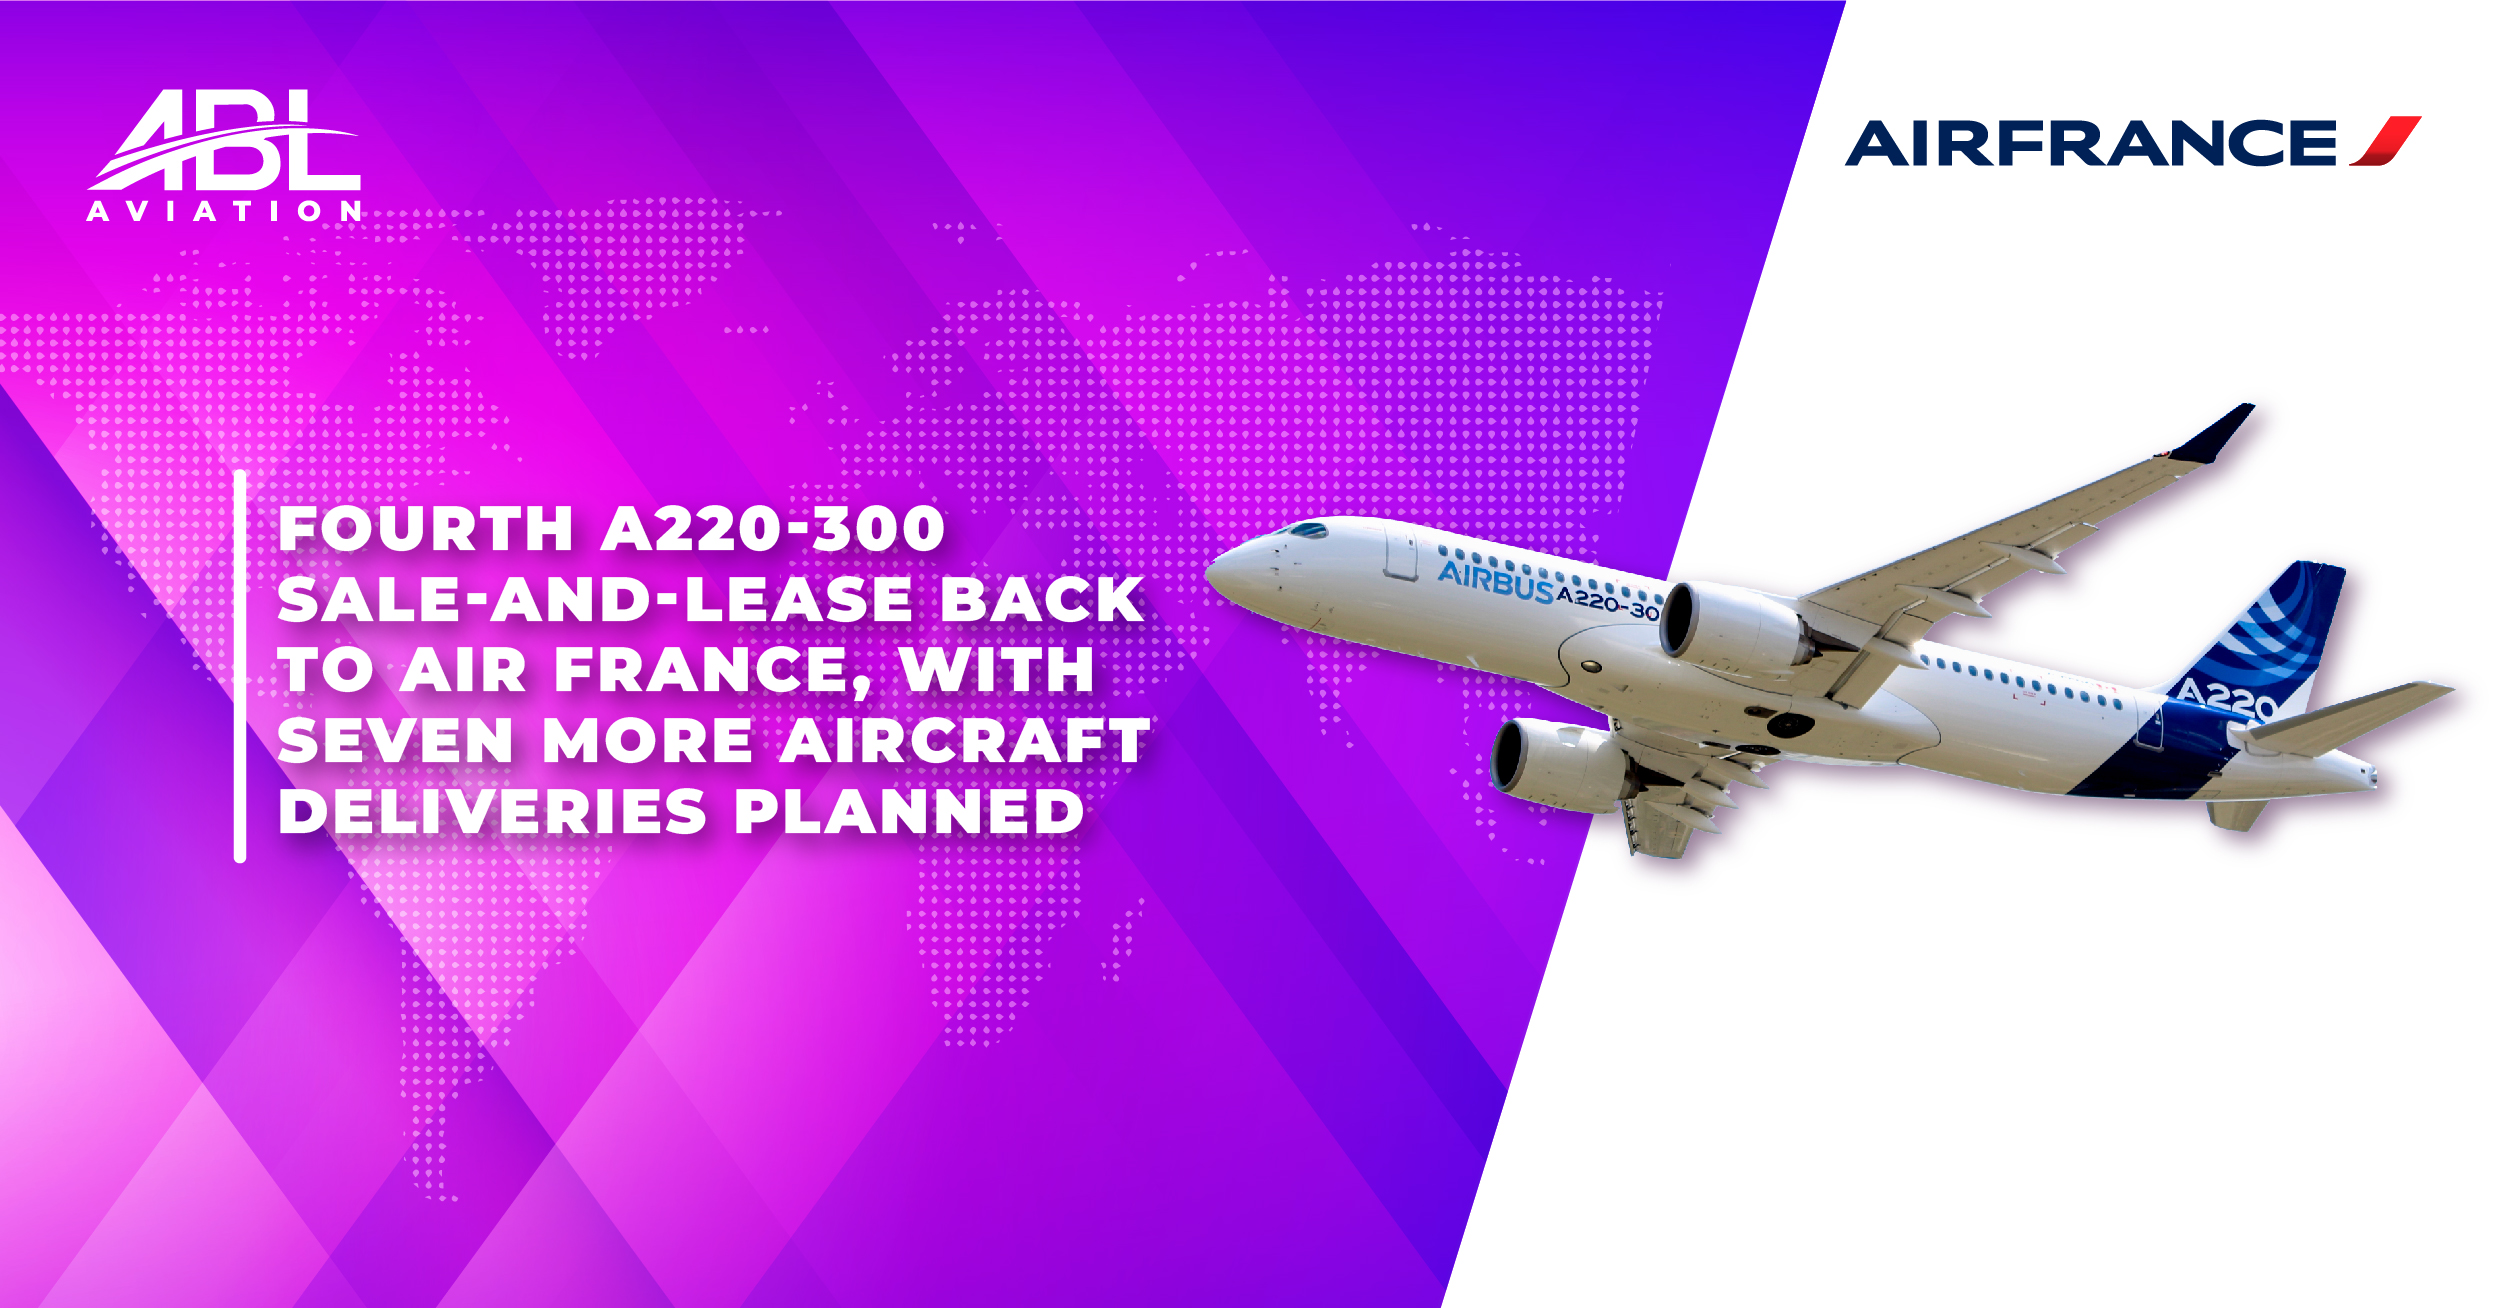 ABL Aviation Announces Fourth A220-300 Sale-And-Leaseback to Air France, With Seven More Aircraft Deliveries Planned